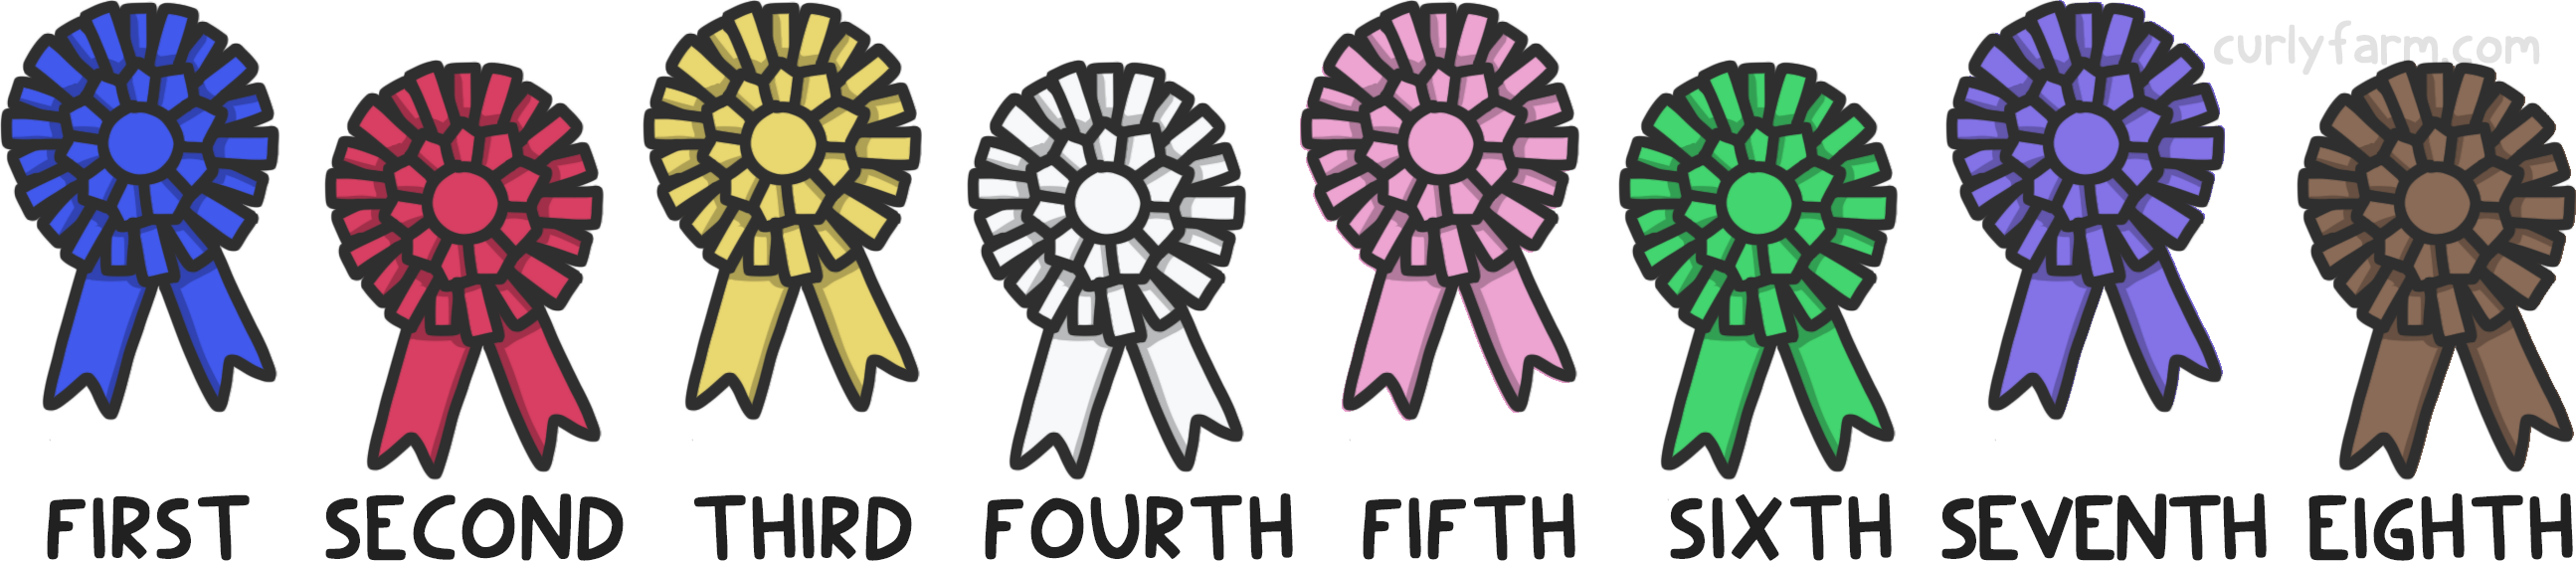 horse show ribbon colors and their meaning and rank, shown in a simple illustration.